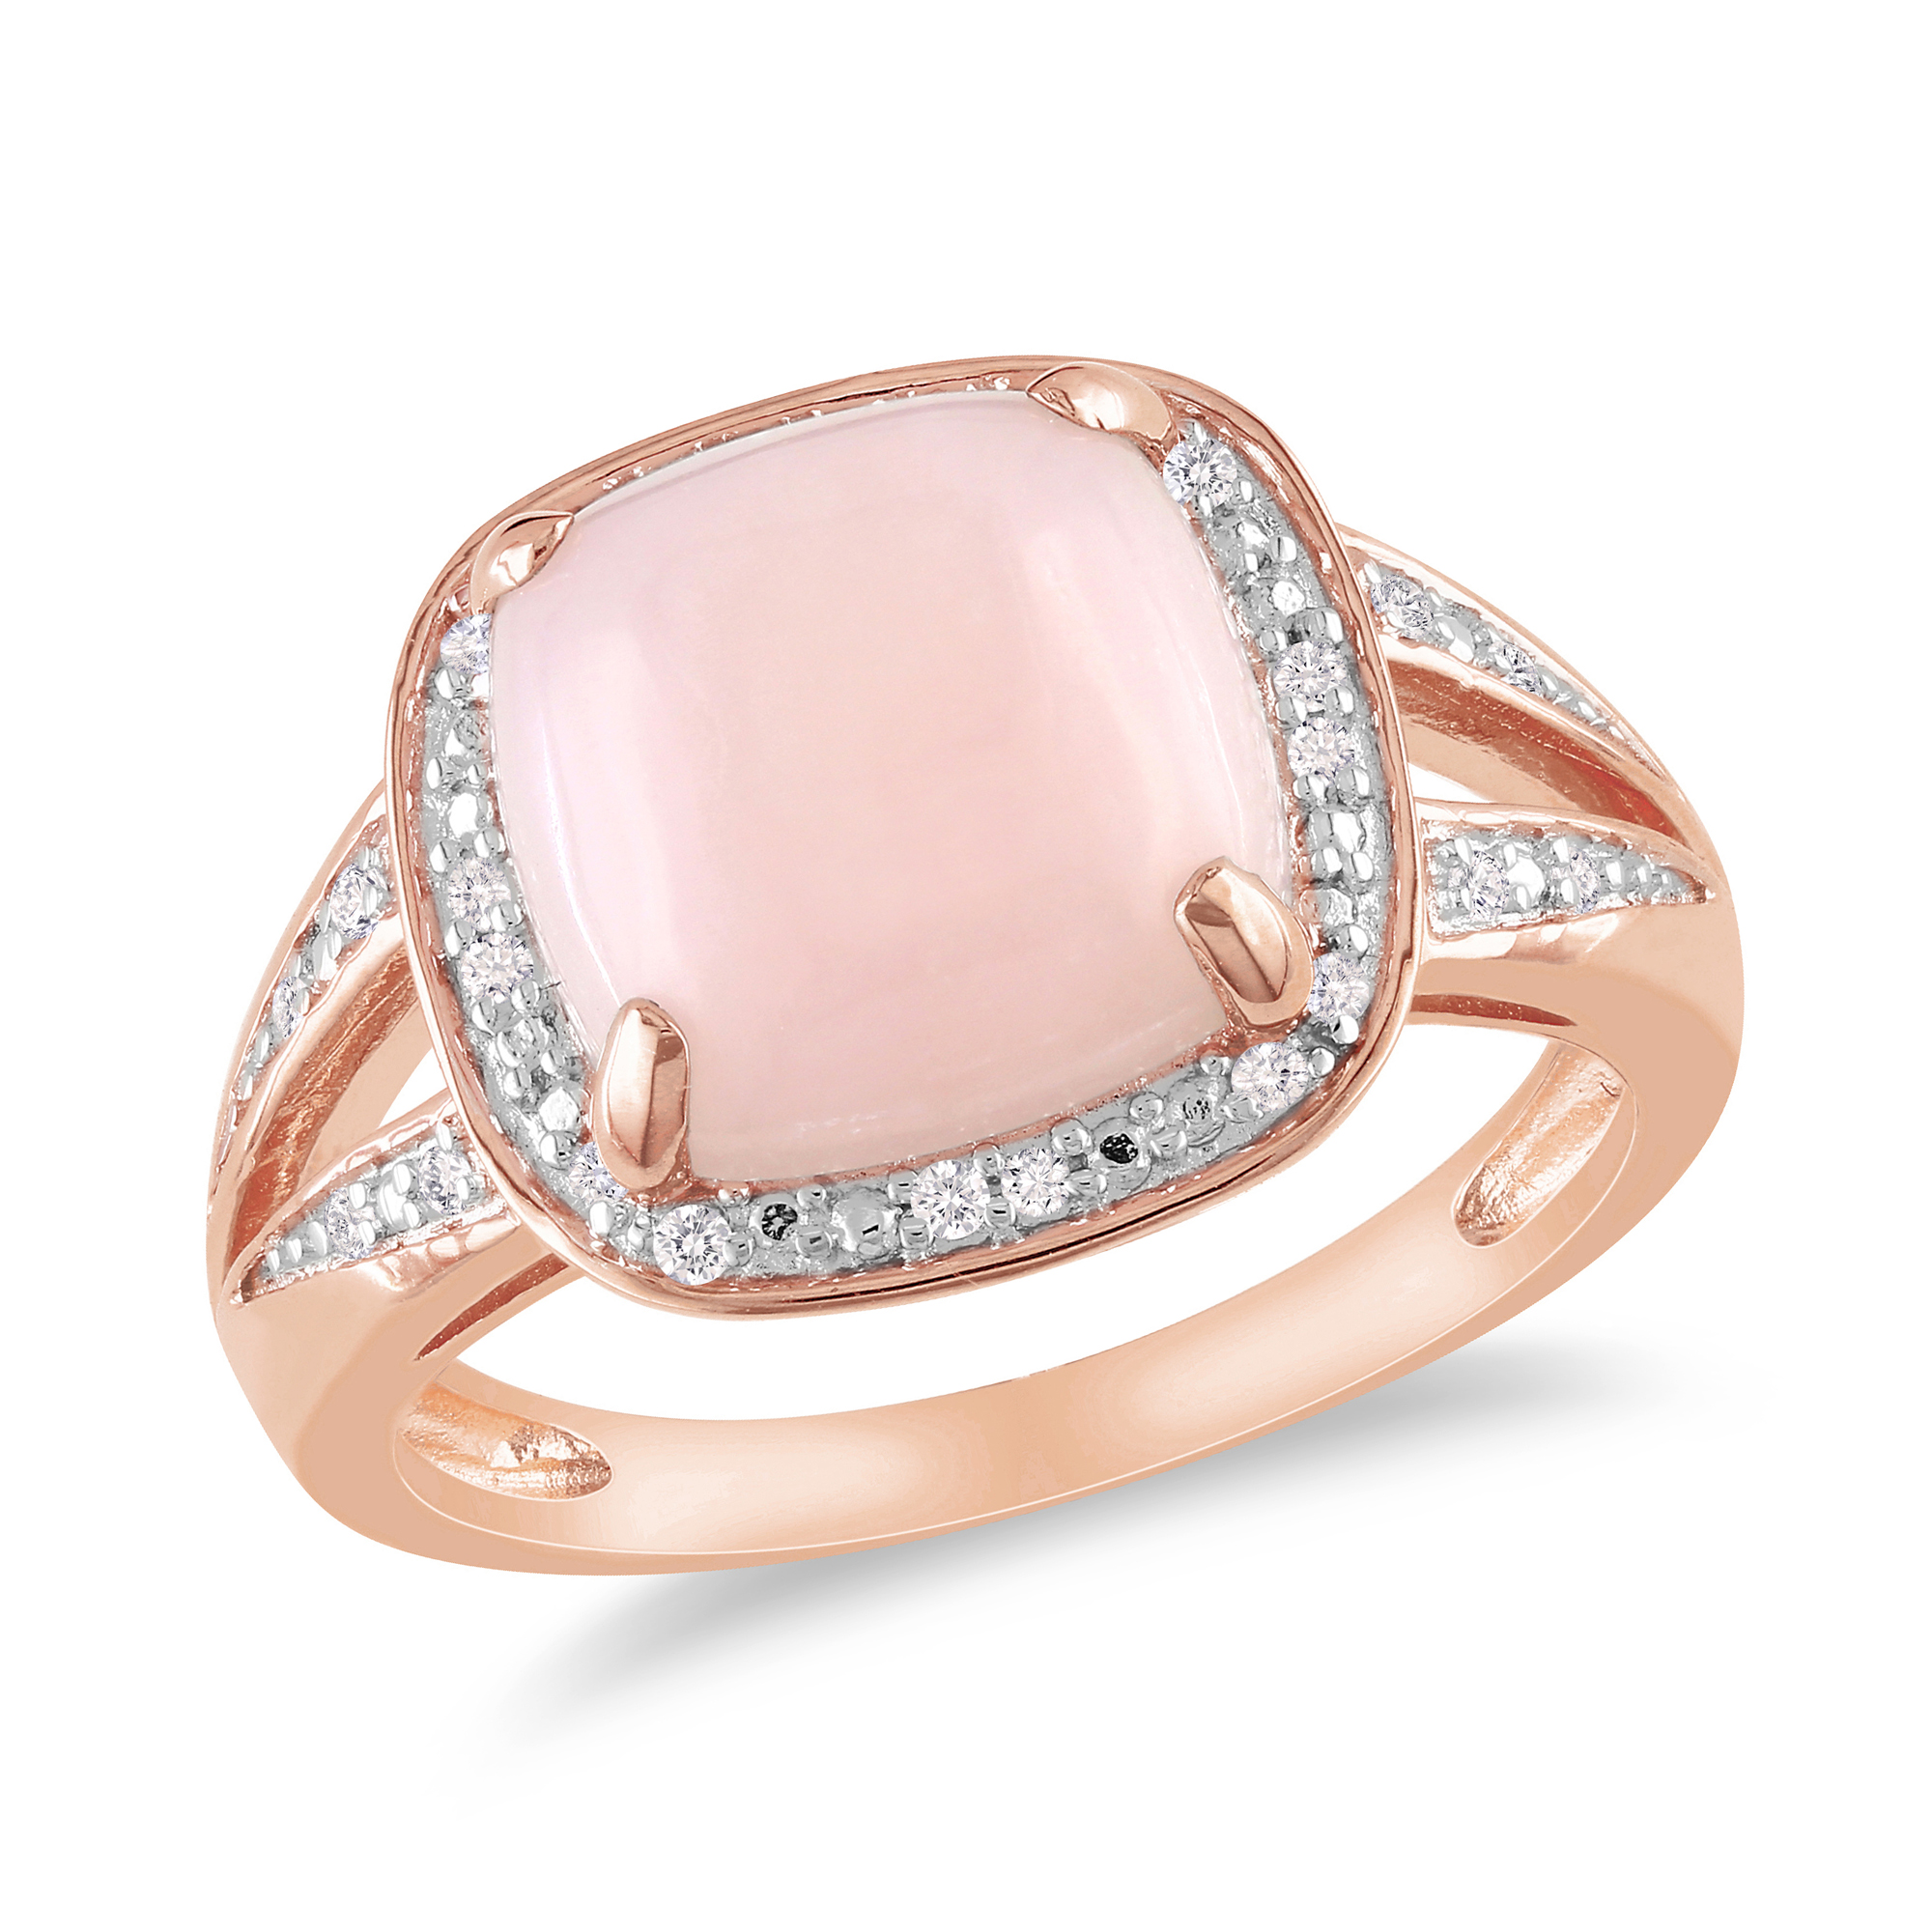 Amour 1/10 Carat T.W. Diamond and 5 Carat T.G.W. Pink Opal Fashion Ring Pink Sterling Silver GH I2;I3